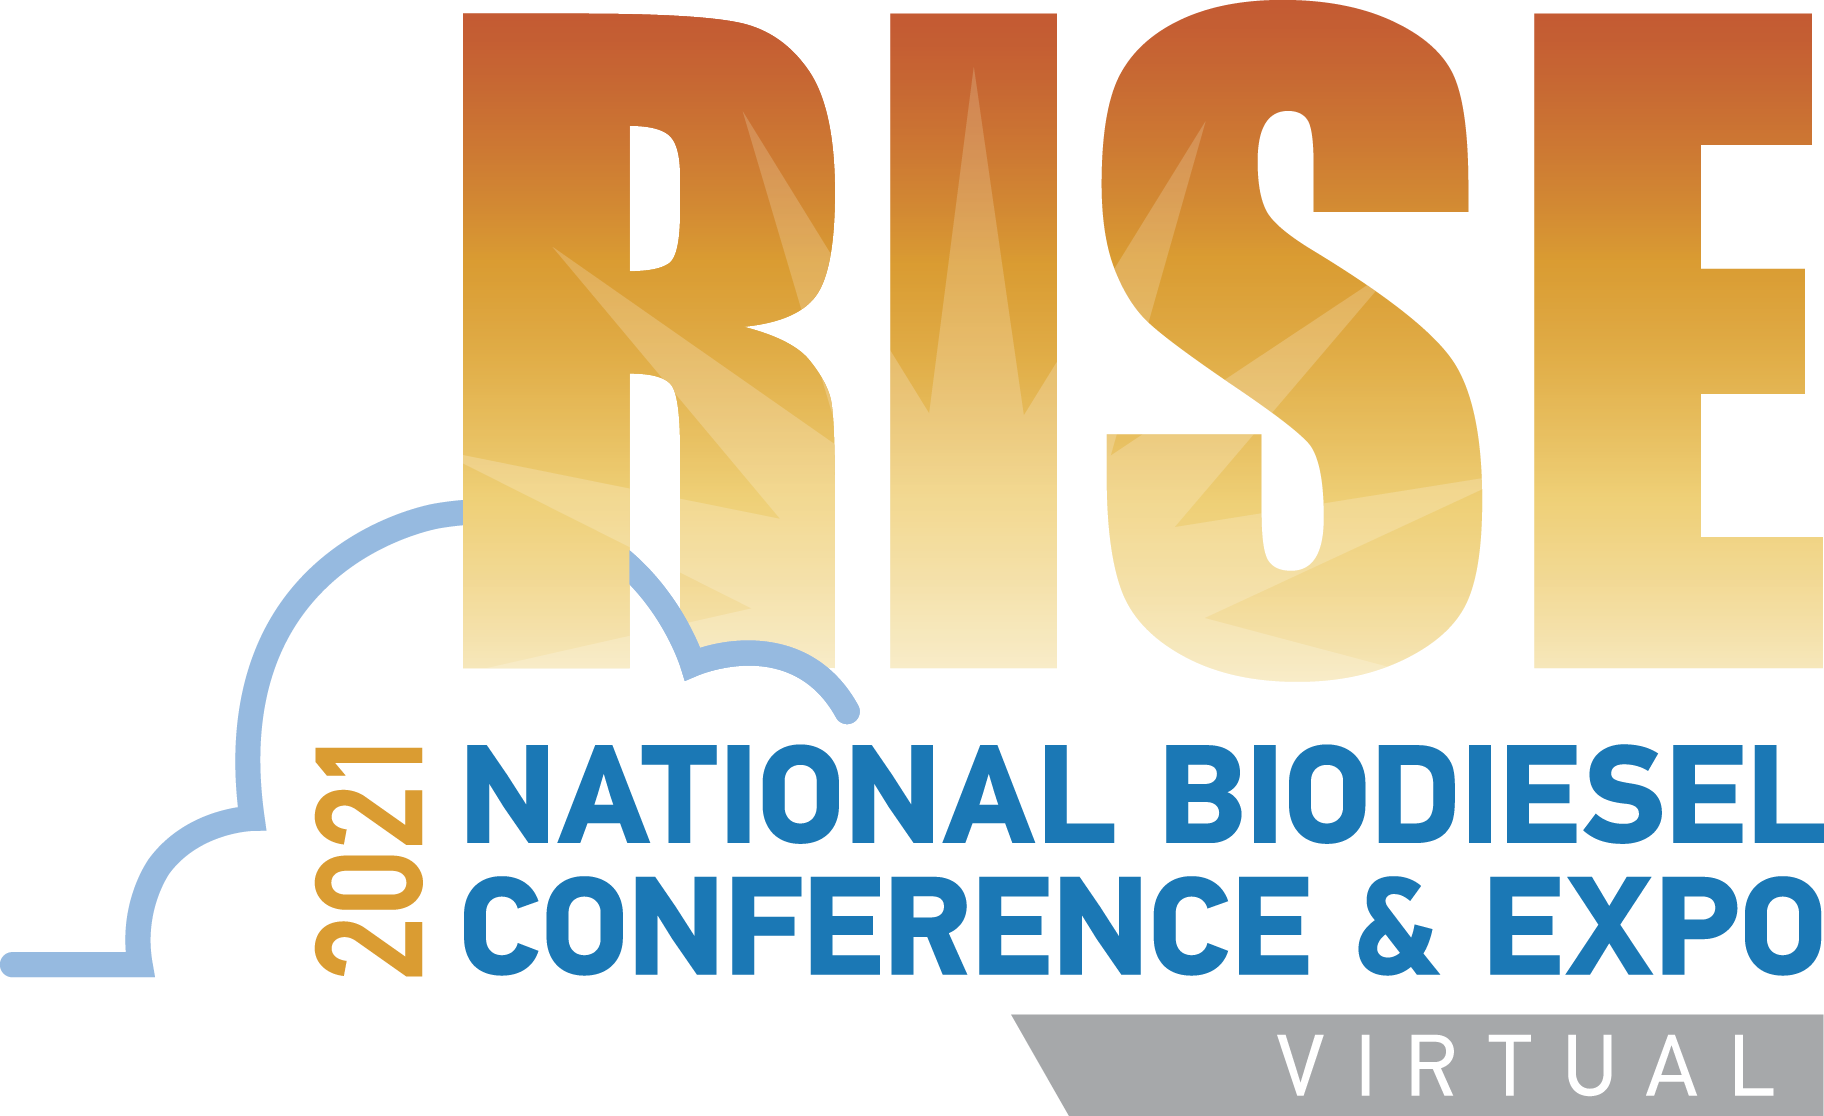 Sessions | 2021 National Biodiesel Conference & Expo